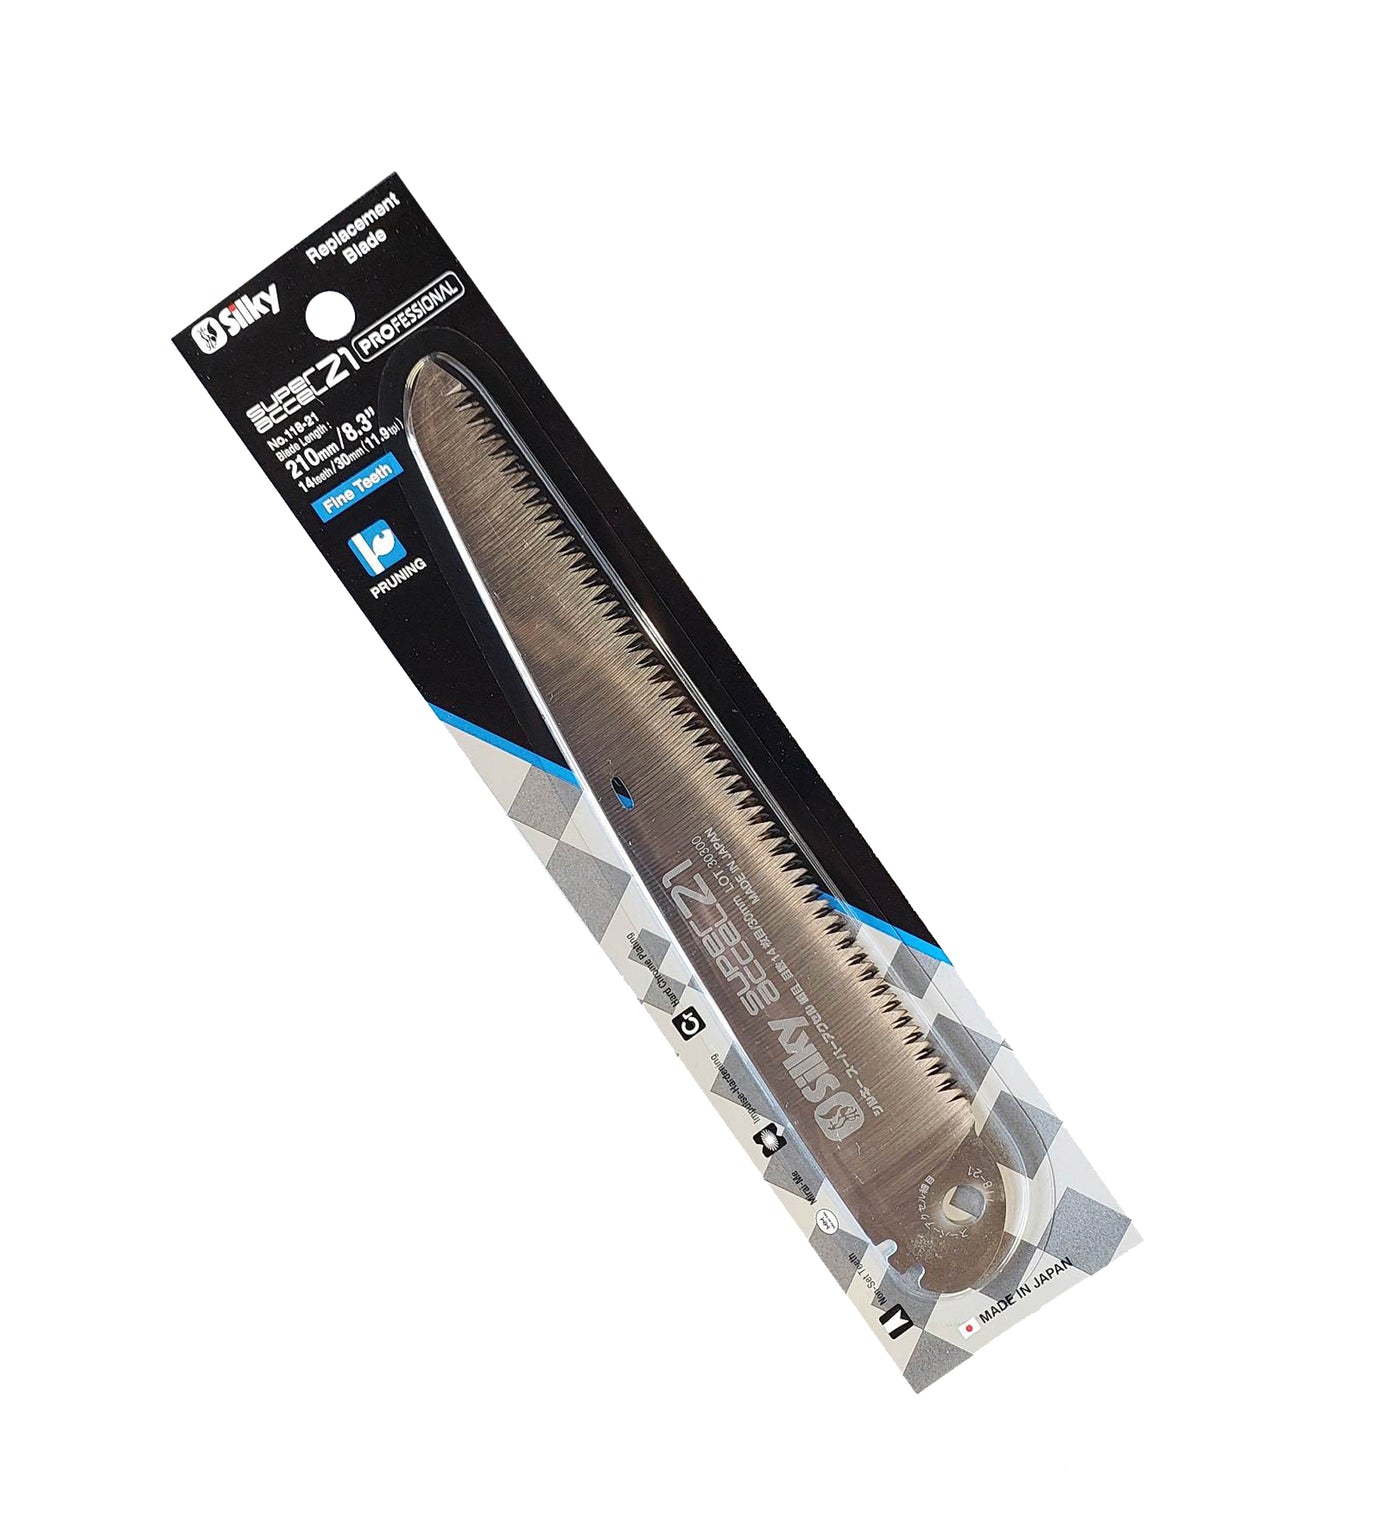 Silky Super Accel Fine Teeth Replacement Blade